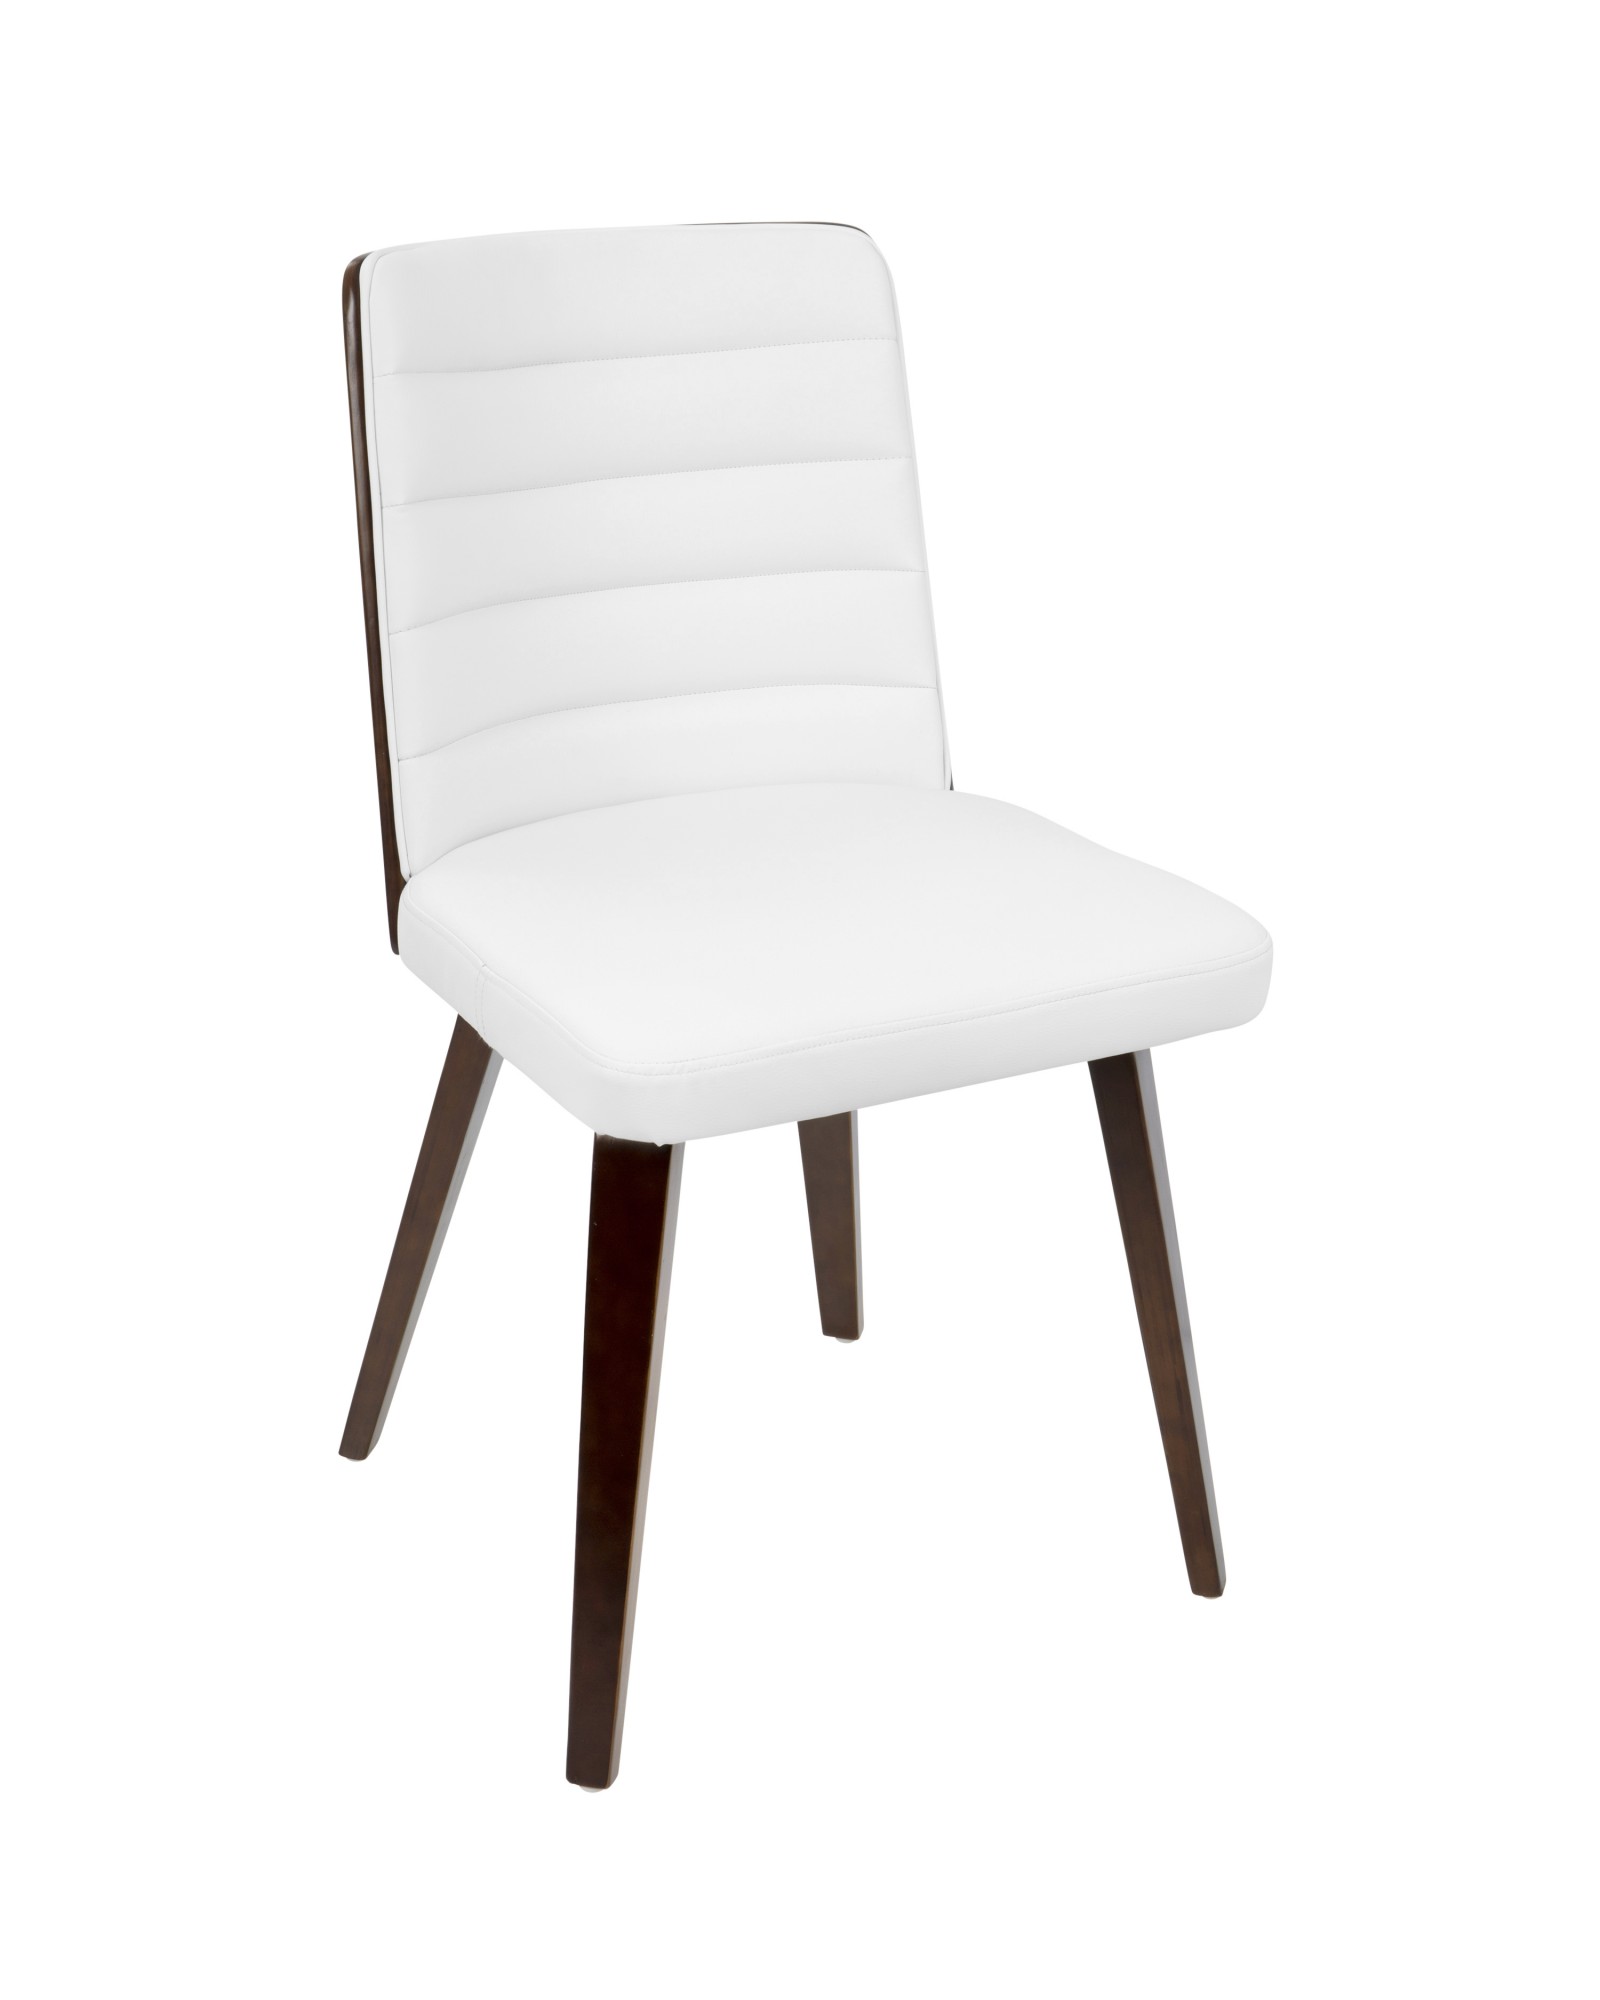 Francesca Mid-Century Modern Dining/Accent Chair in Cherry Wood and White Faux Leather